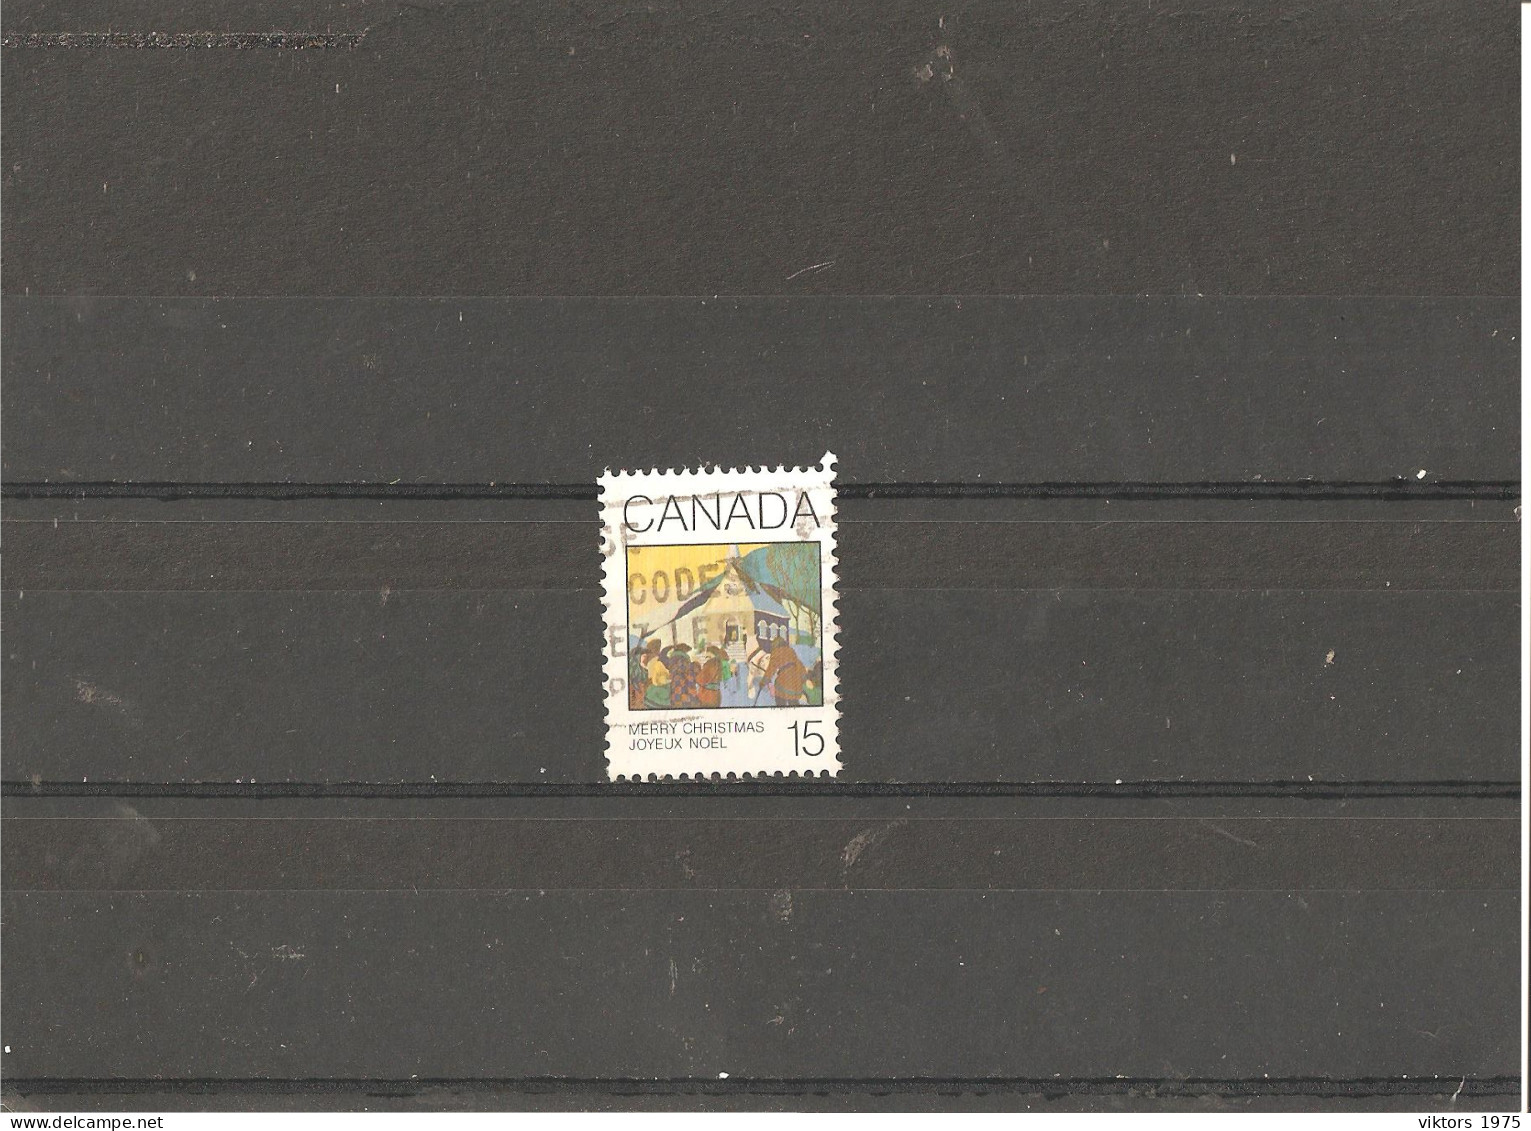 Used Stamp Nr.918 In Darnell Catalog - Used Stamps